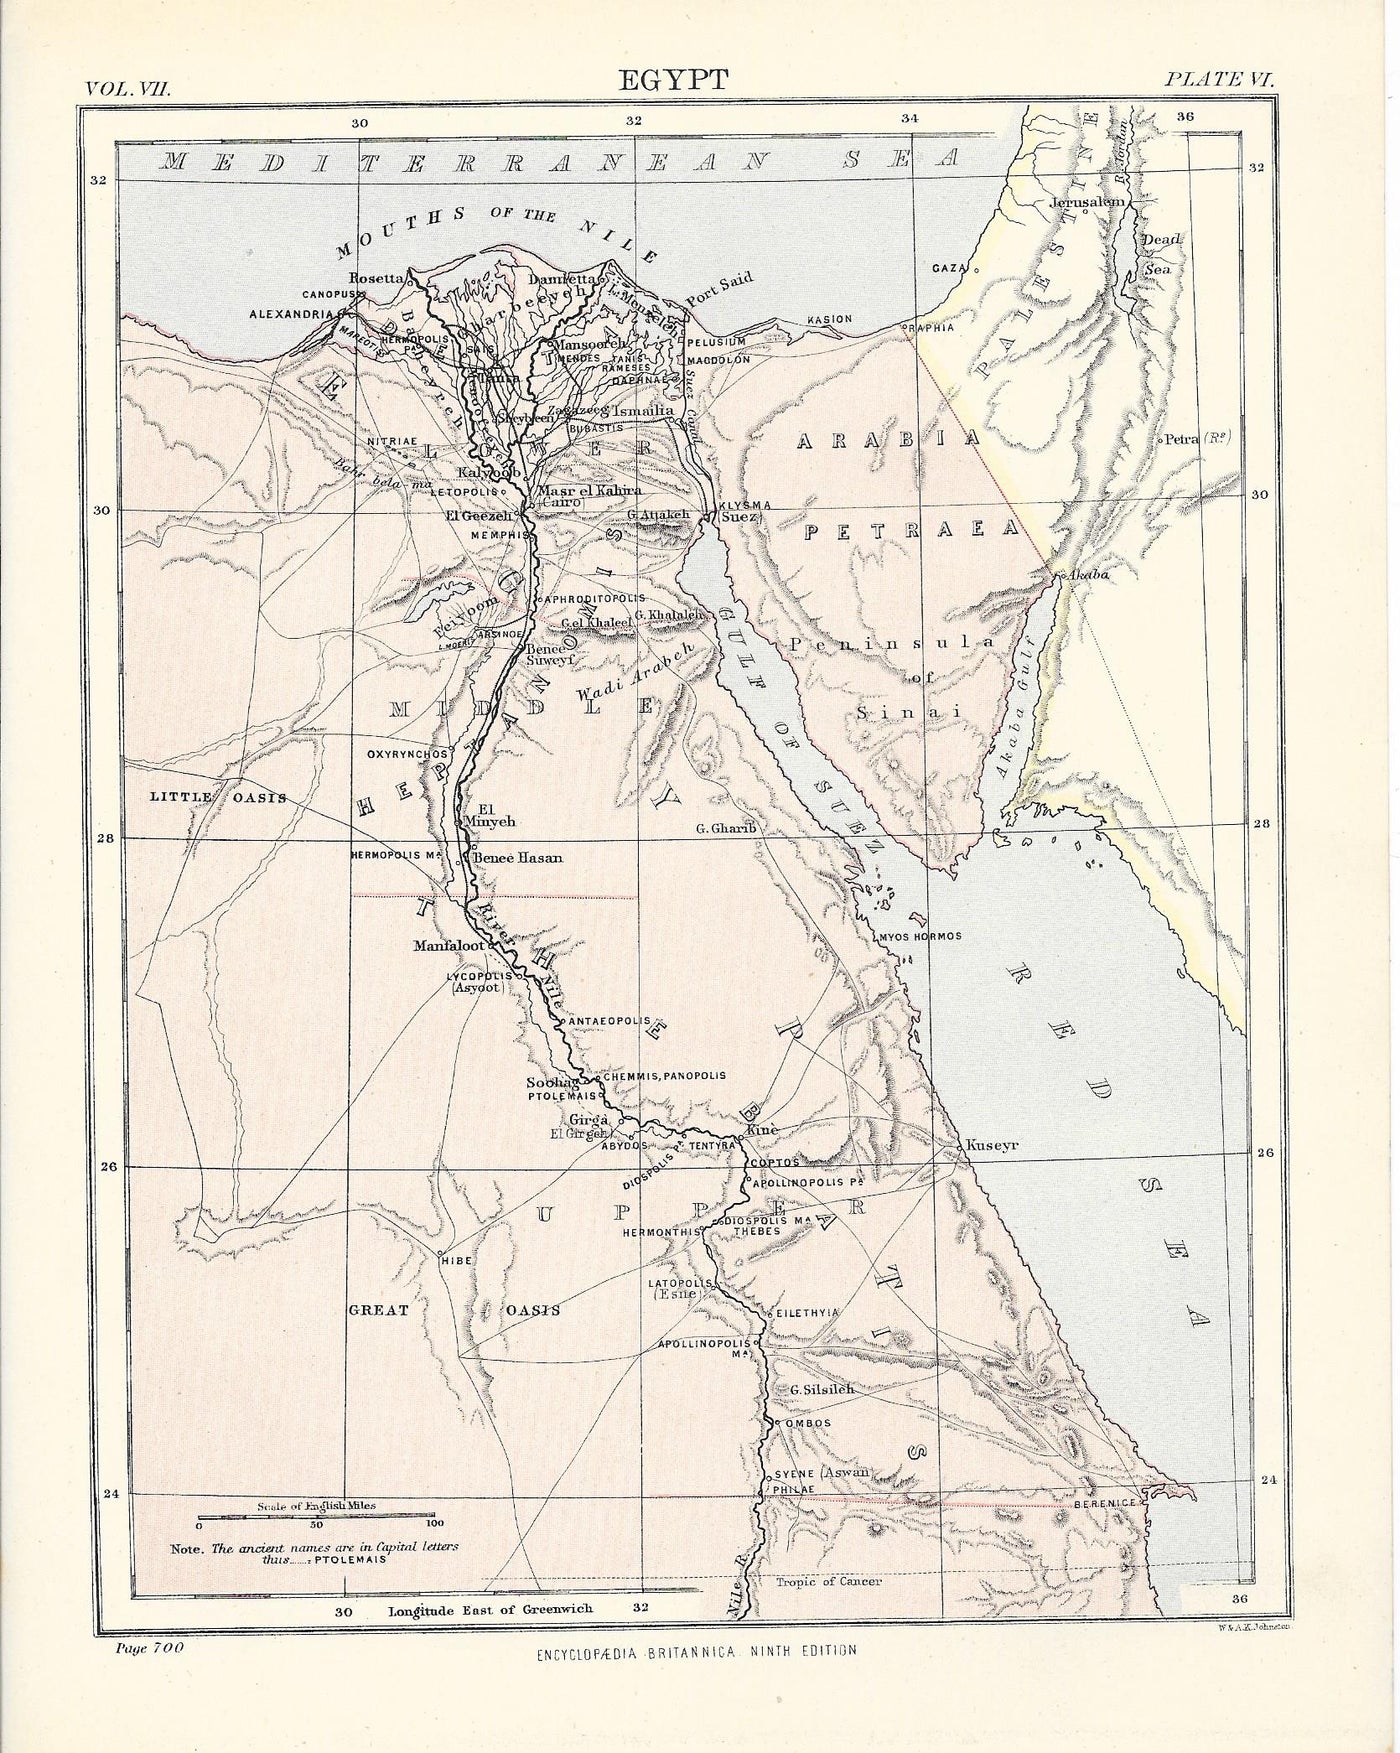 Egypt antique map from Encyclopedia Britannica 1889